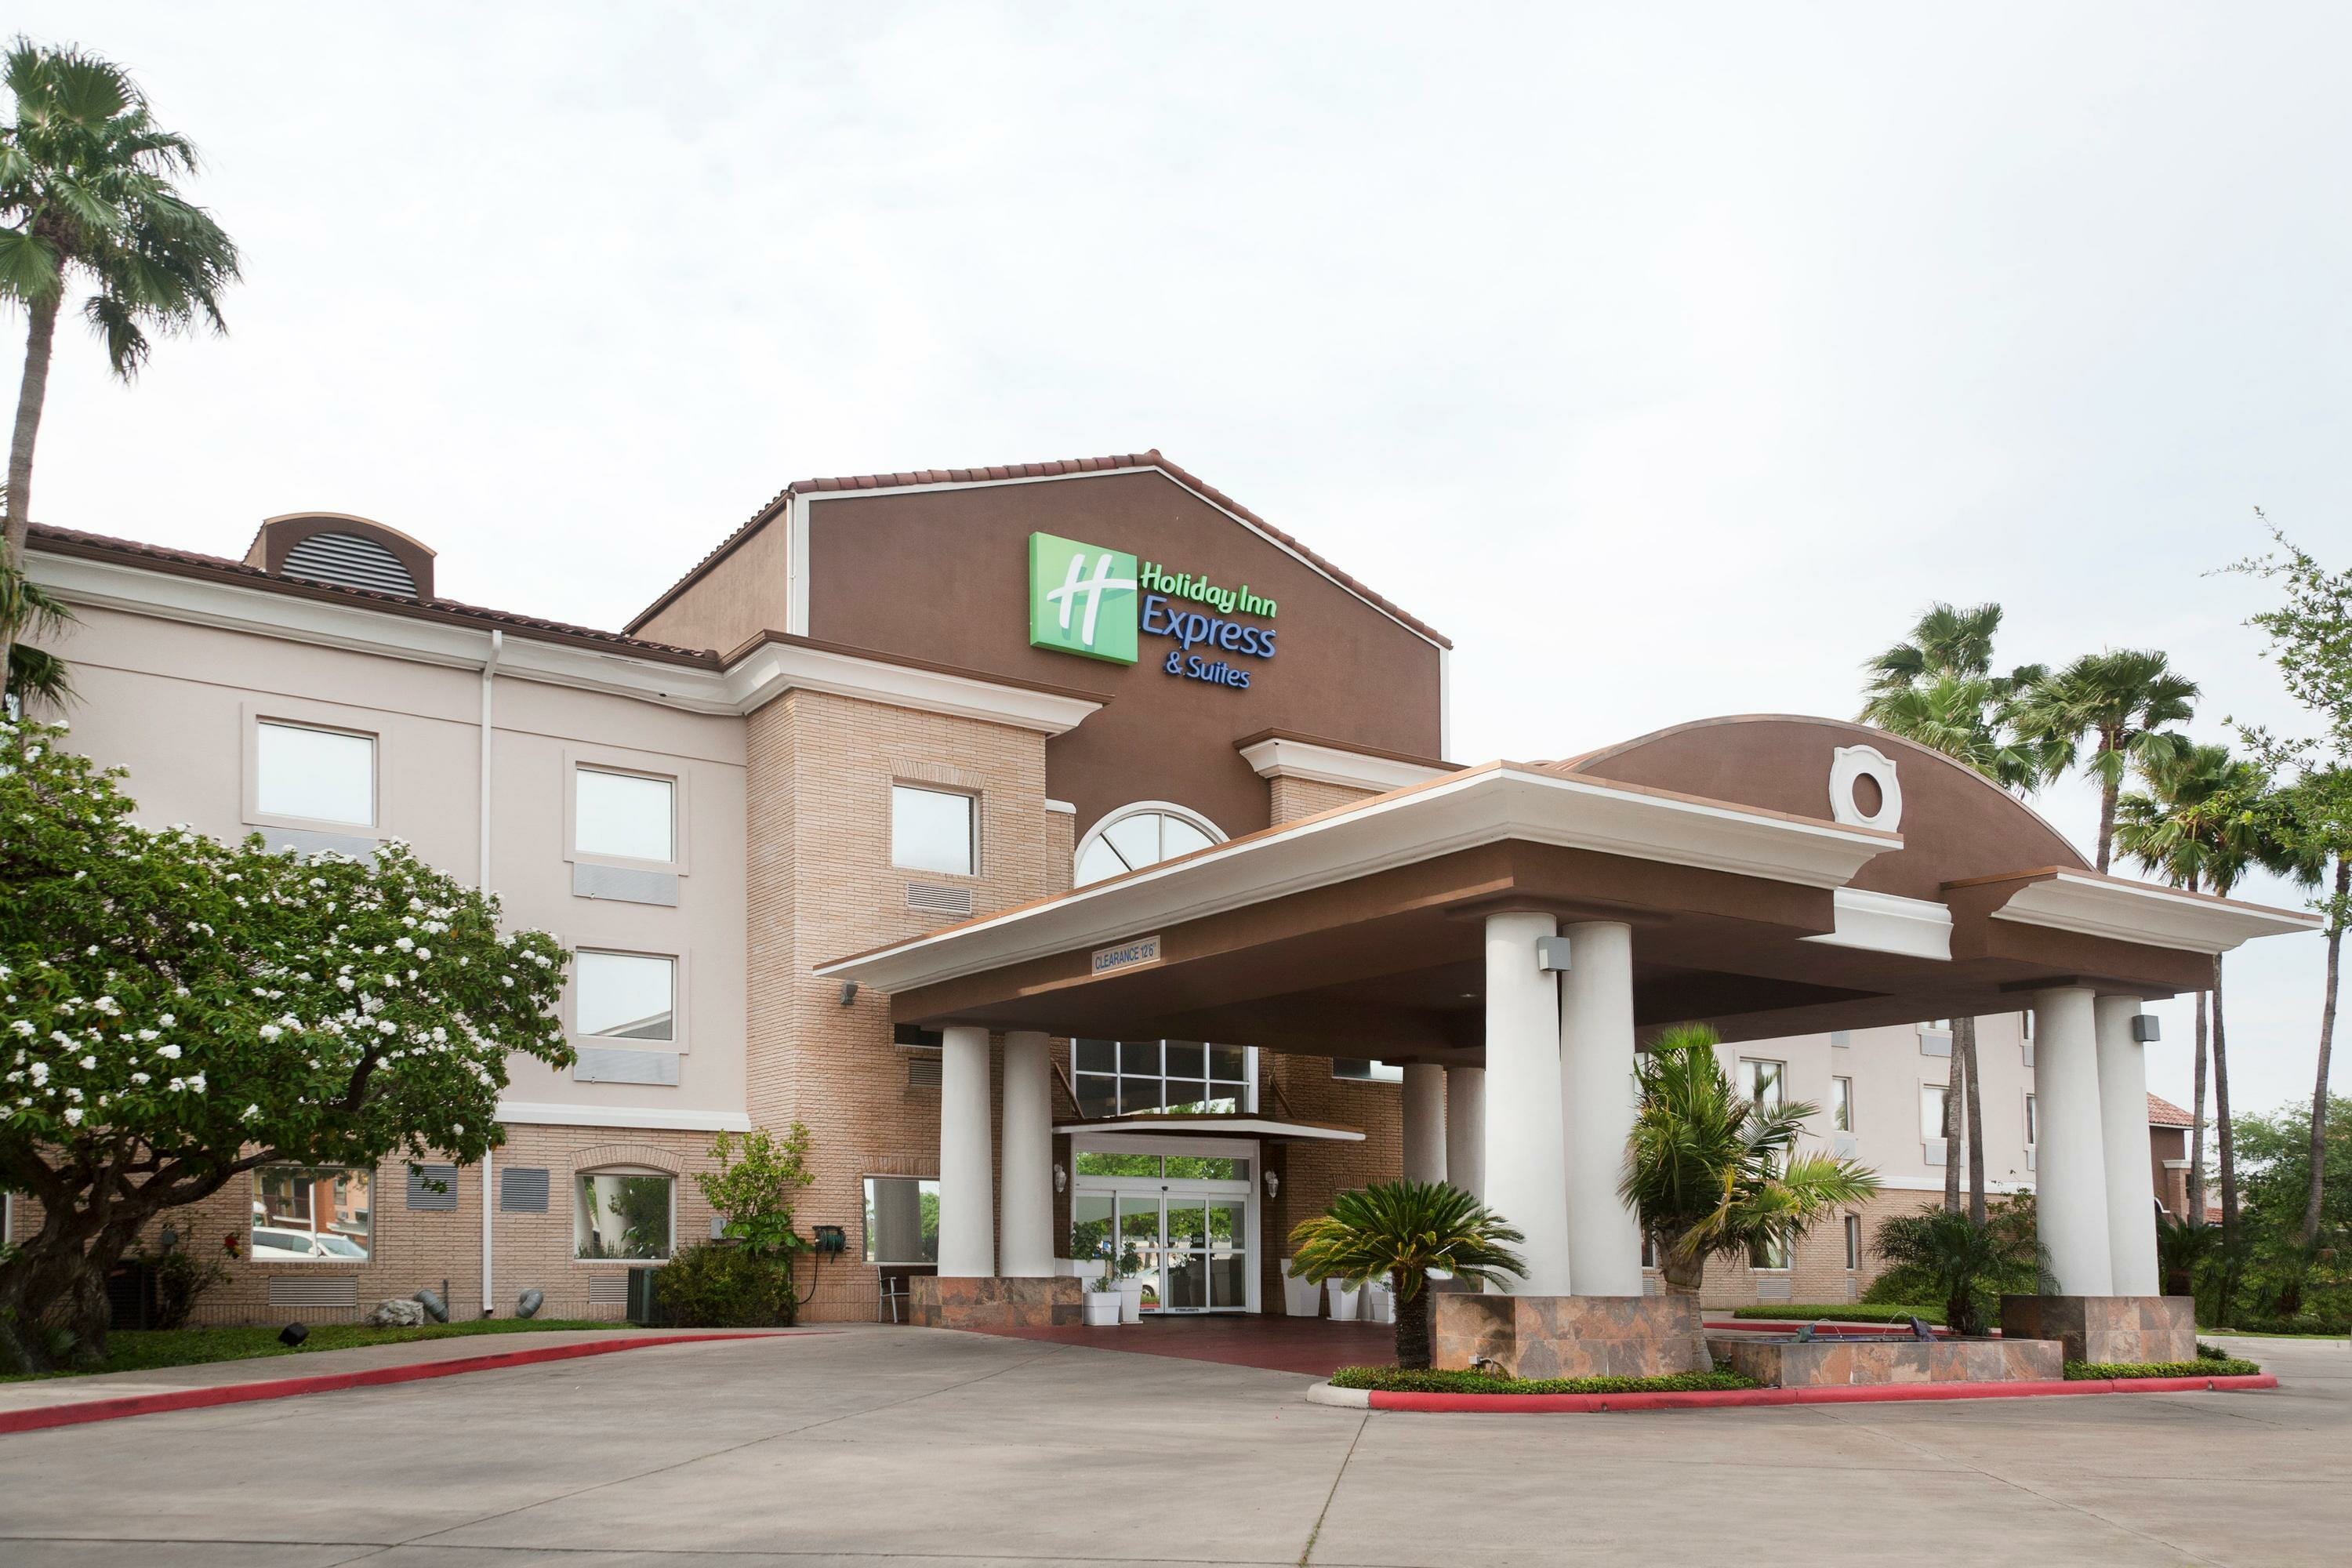 Building view of Holiday Inn Express Hotel & Suites Brownsville